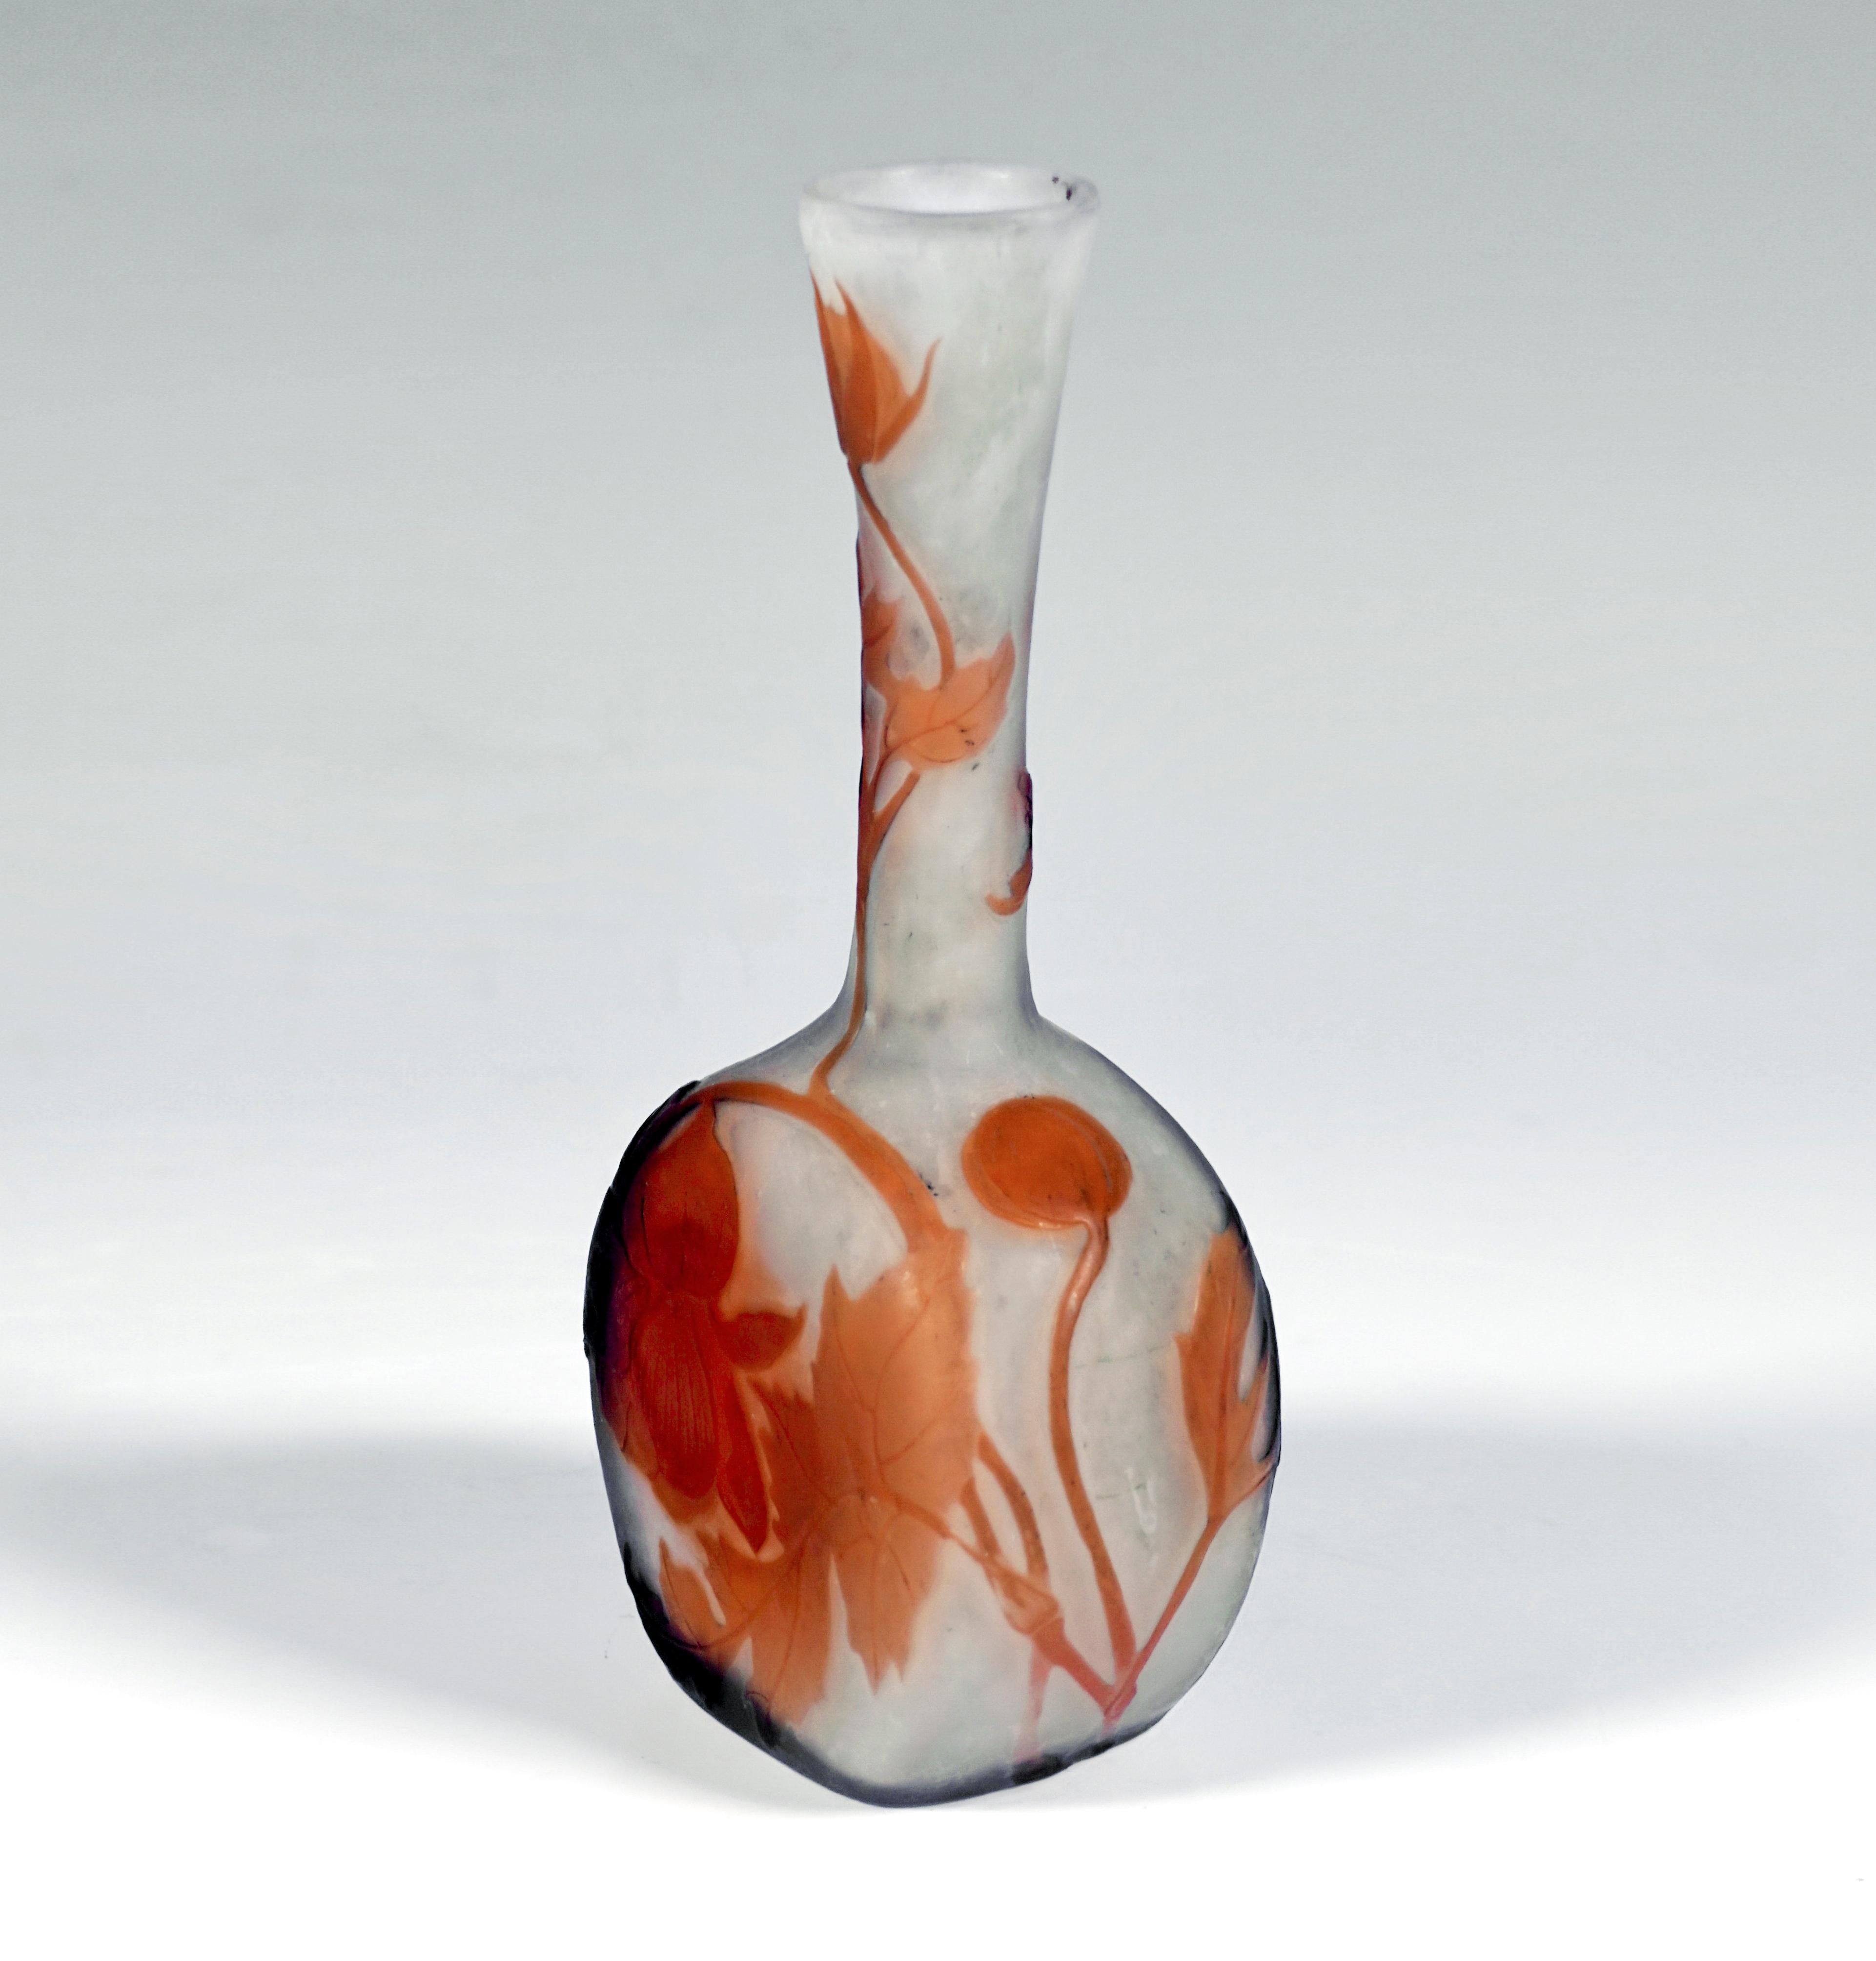 Vase in the form of a flacon: drum-shaped body with a flattened, flush stand, attached slim, long neck, widening towards the rim of the mouth in the shape of a trumpet, colorless glass with white, flaky powder inclusions, overlay in orange, in